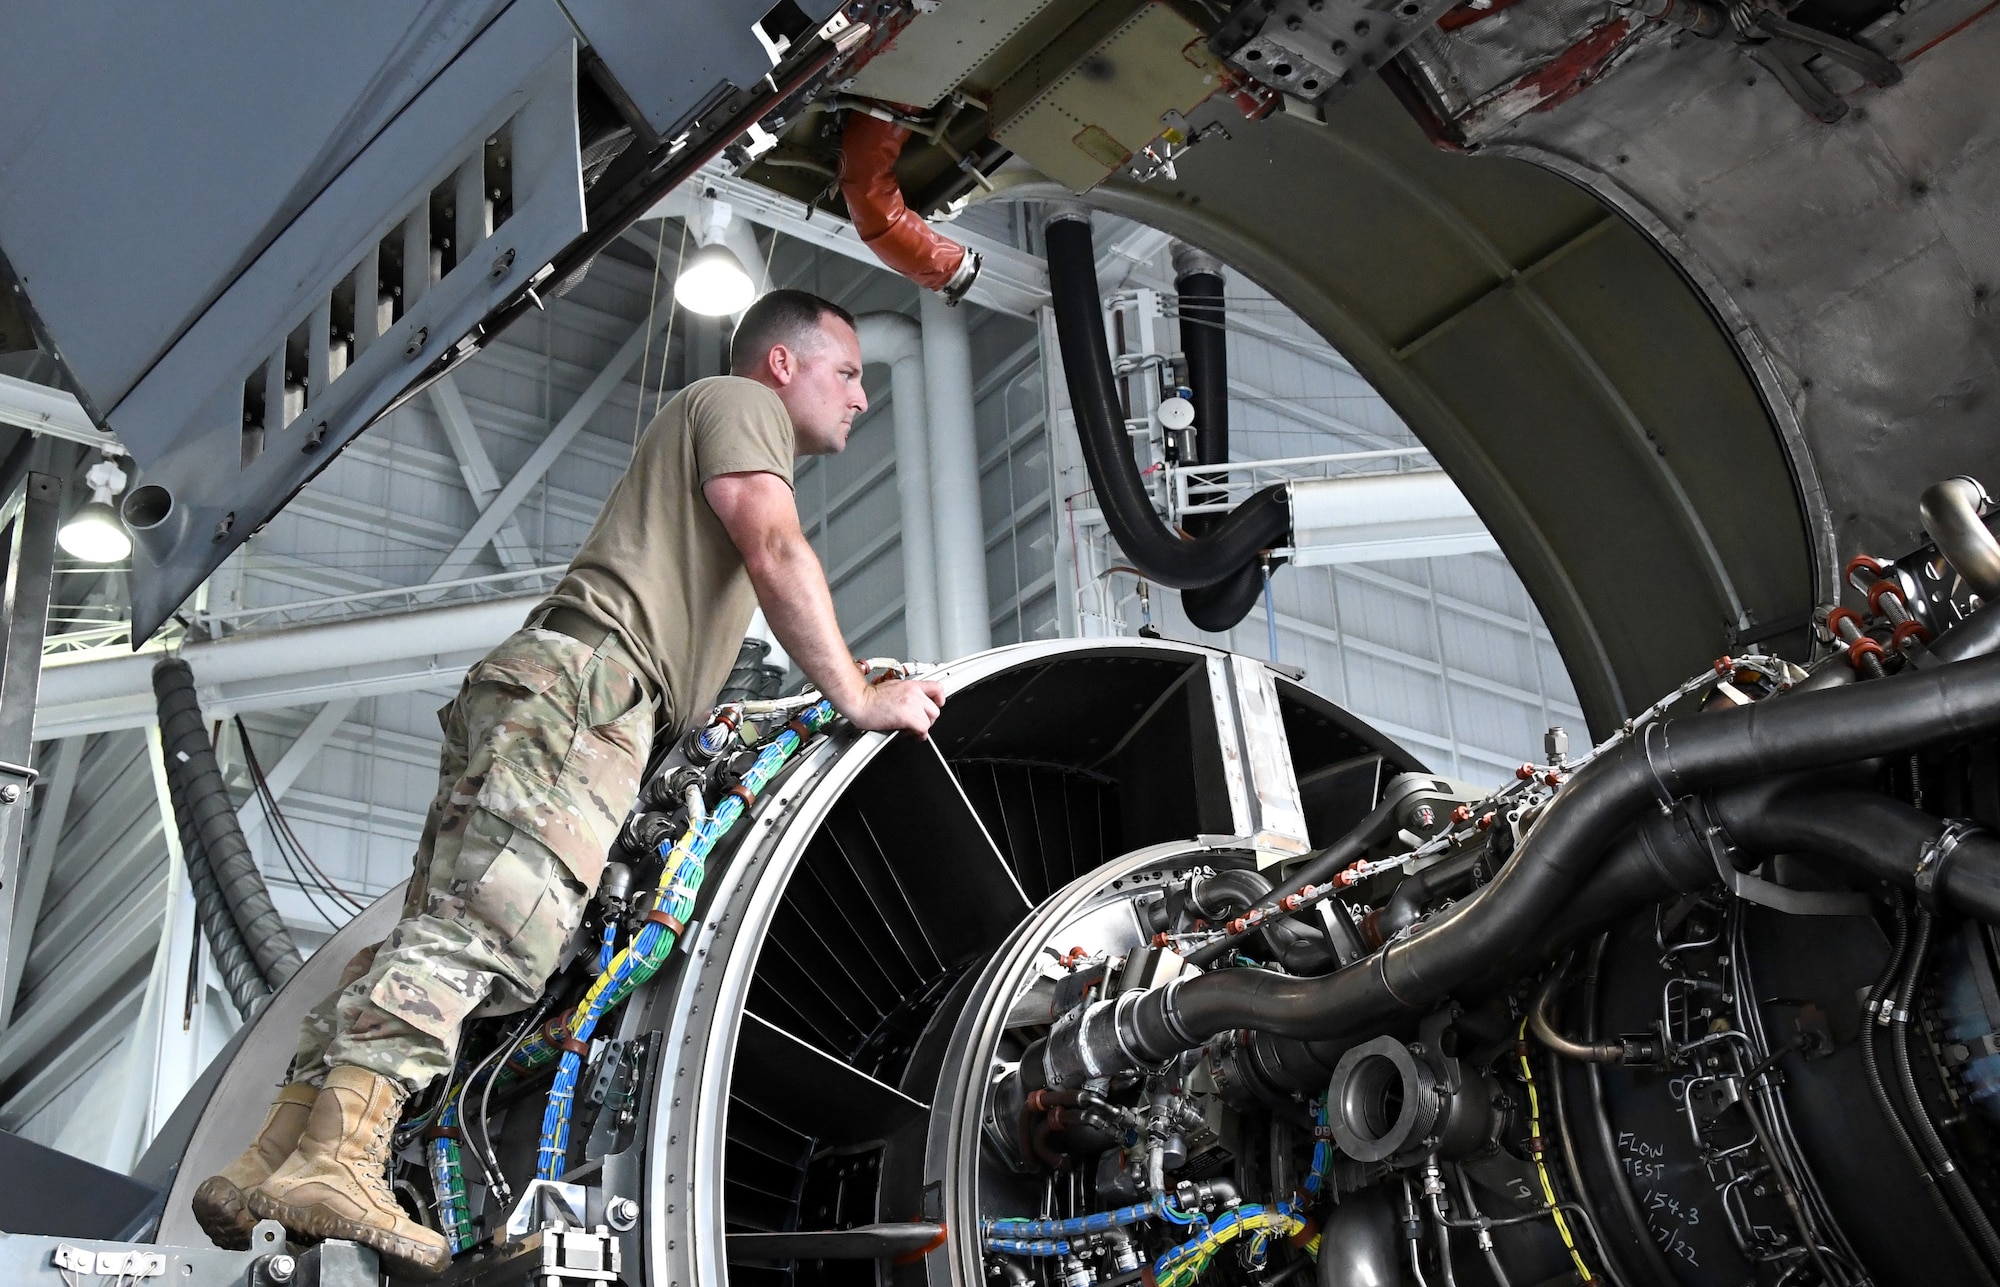 U.S. Air Force Tech. Sgt. Derek Lescord, assigned to the 735th Air Mobility Squadron, inspects a C-17 Globemaster III engine before installation at Joint Base Pearl Harbor-Hickam, Hawaii on Aug. 19, 2022. (U.S. Air Force photo by Amelia Dickson)